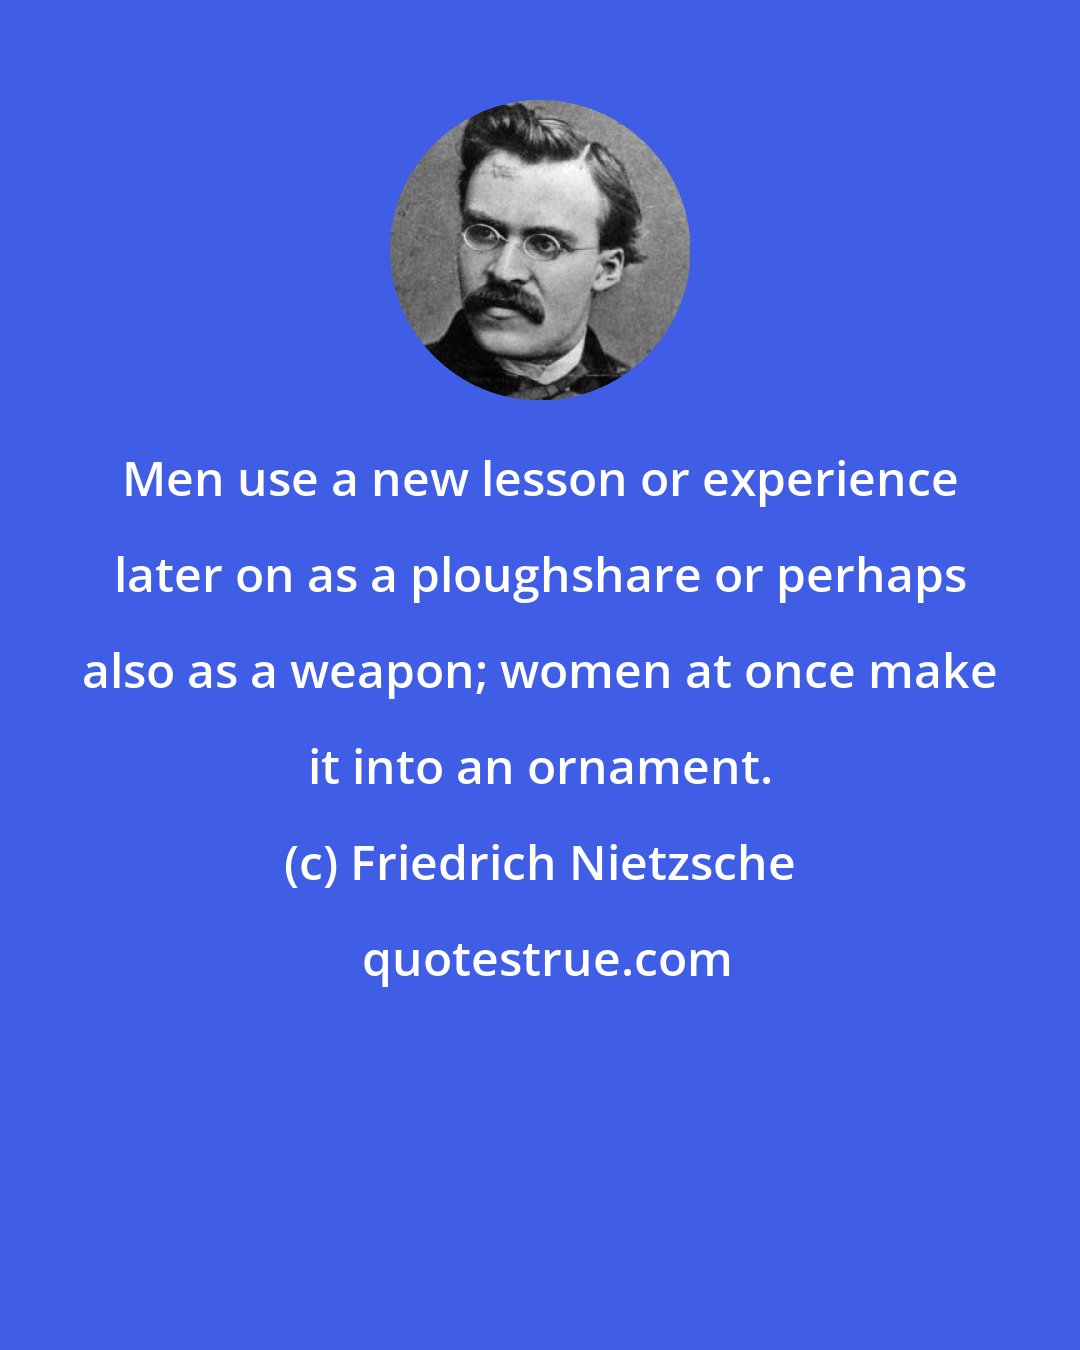 Friedrich Nietzsche: Men use a new lesson or experience later on as a ploughshare or perhaps also as a weapon; women at once make it into an ornament.